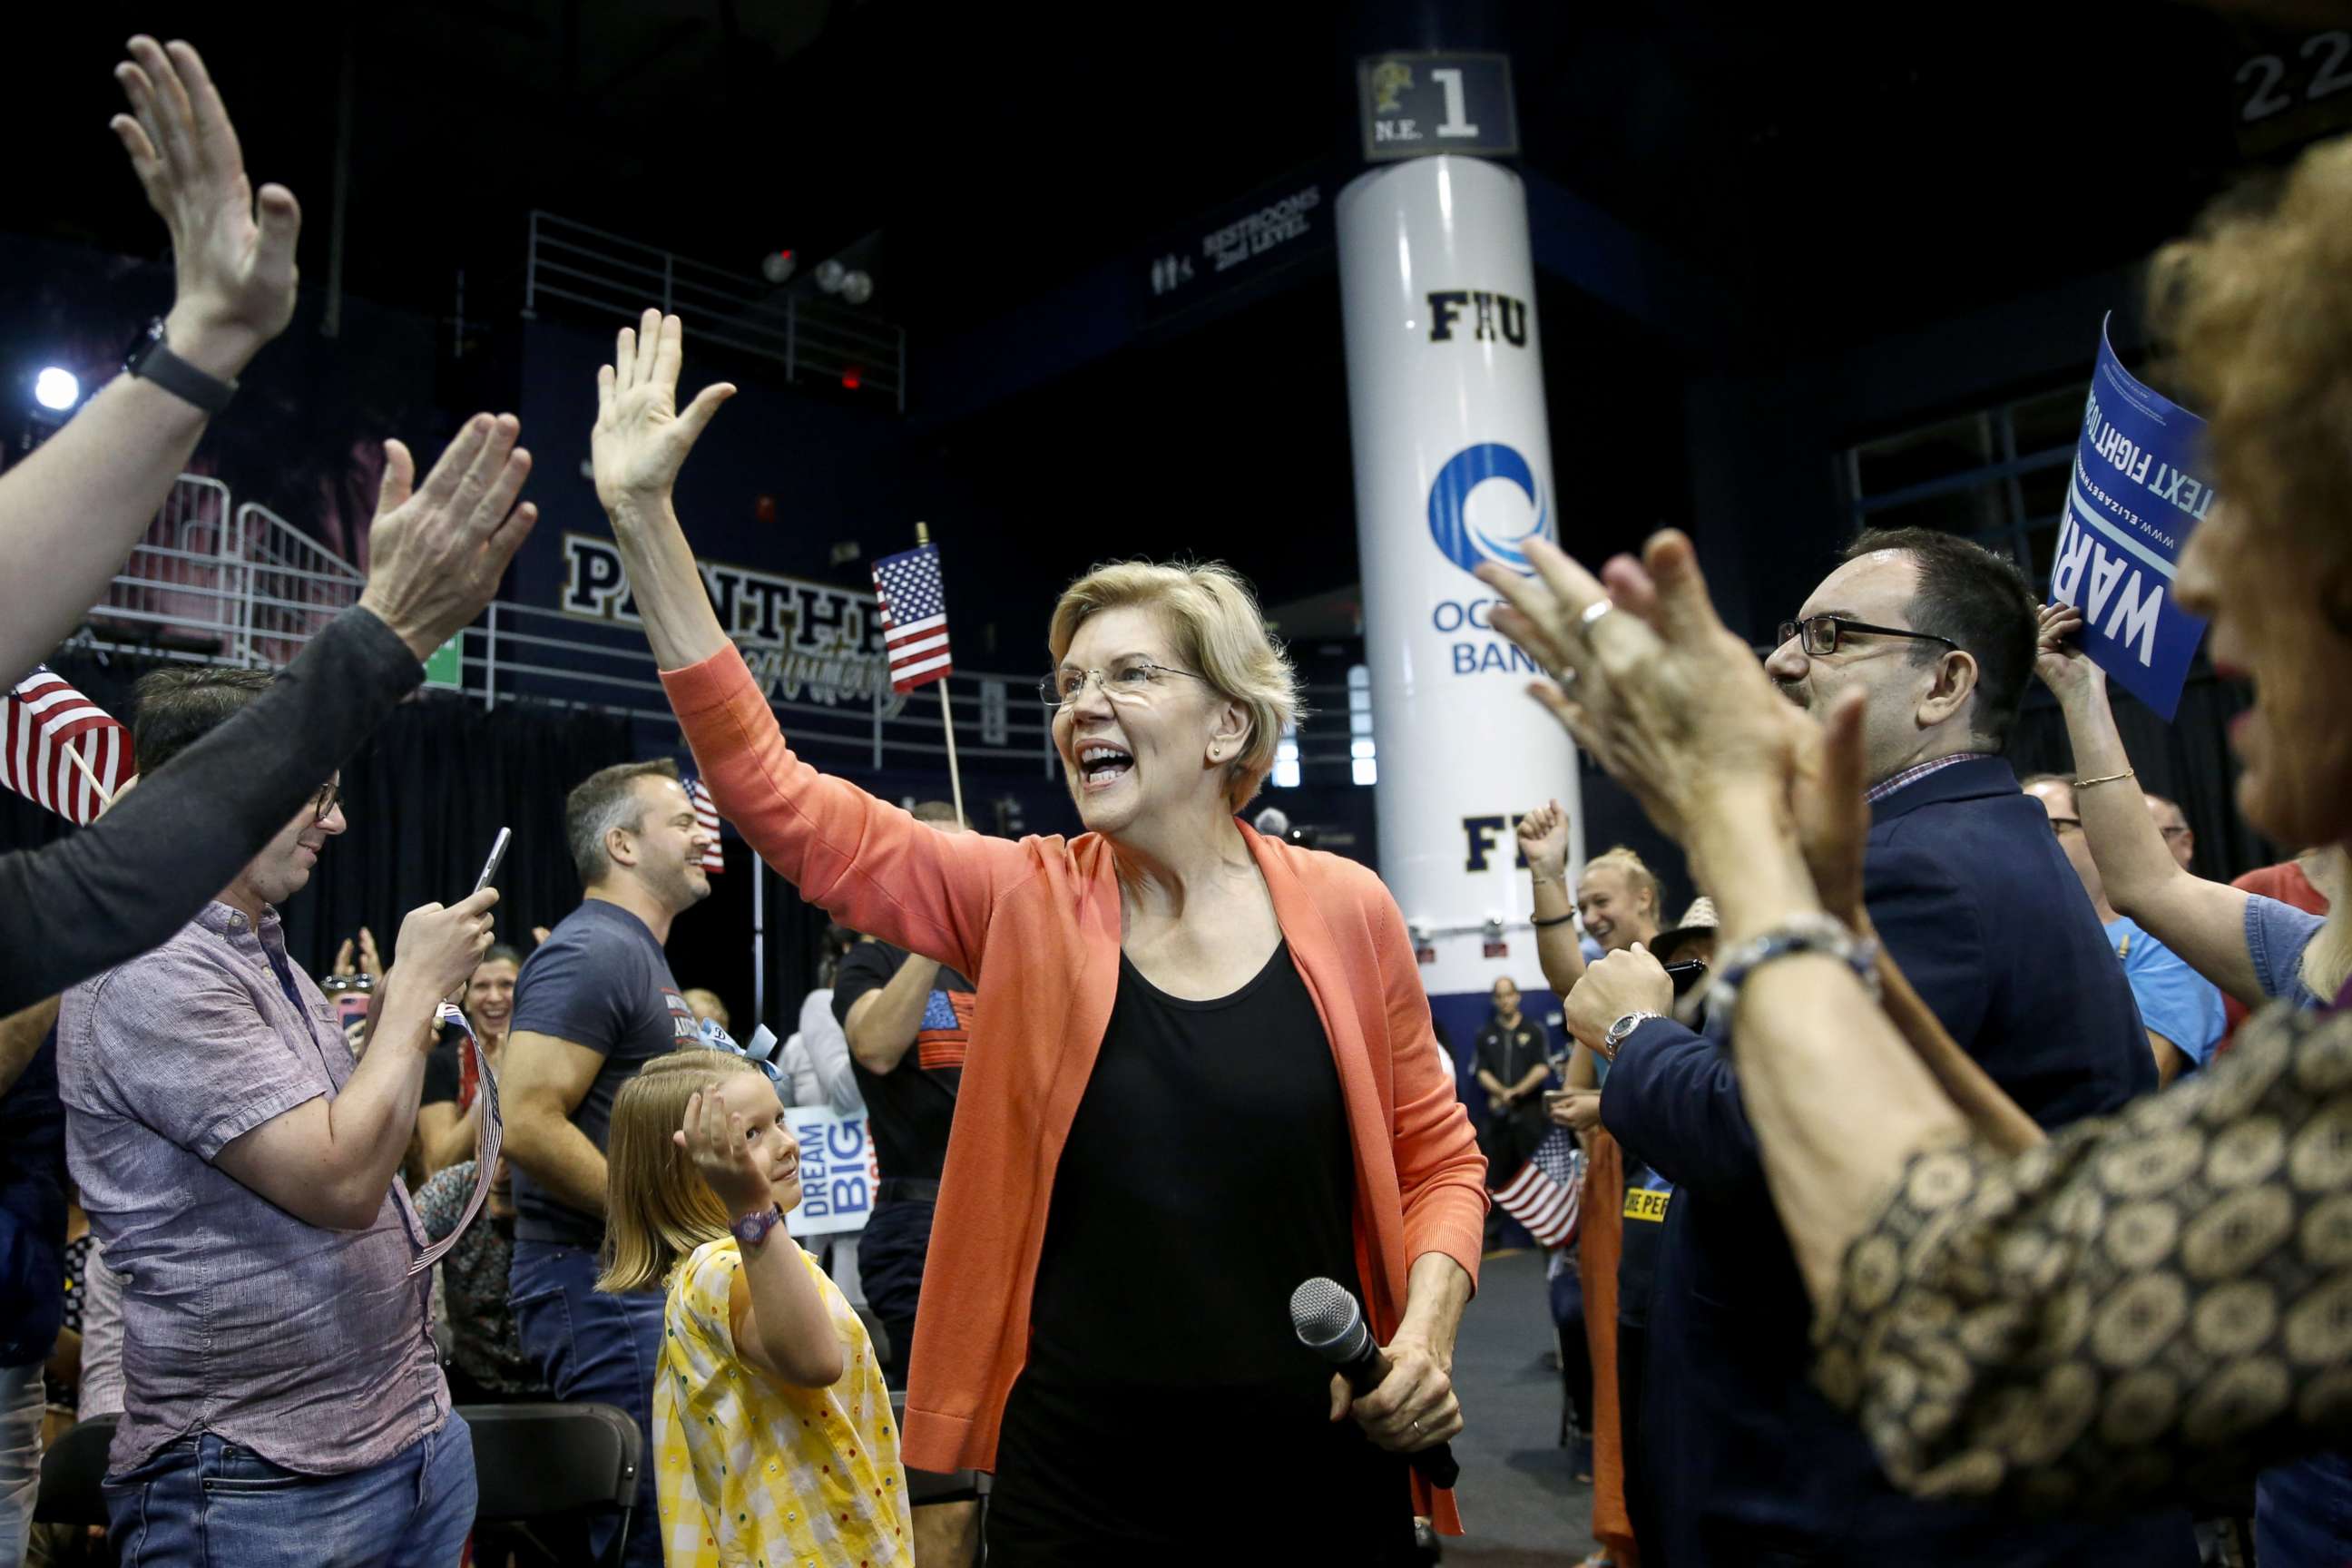 PHOTO: Senator Elizabeth Warren, a Democrat from Massachusetts and 2020 presidential candidate, greets supporters as her arrives for a town hall event in Miami, Florida, U.S., on Tuesday, June 25, 2019.